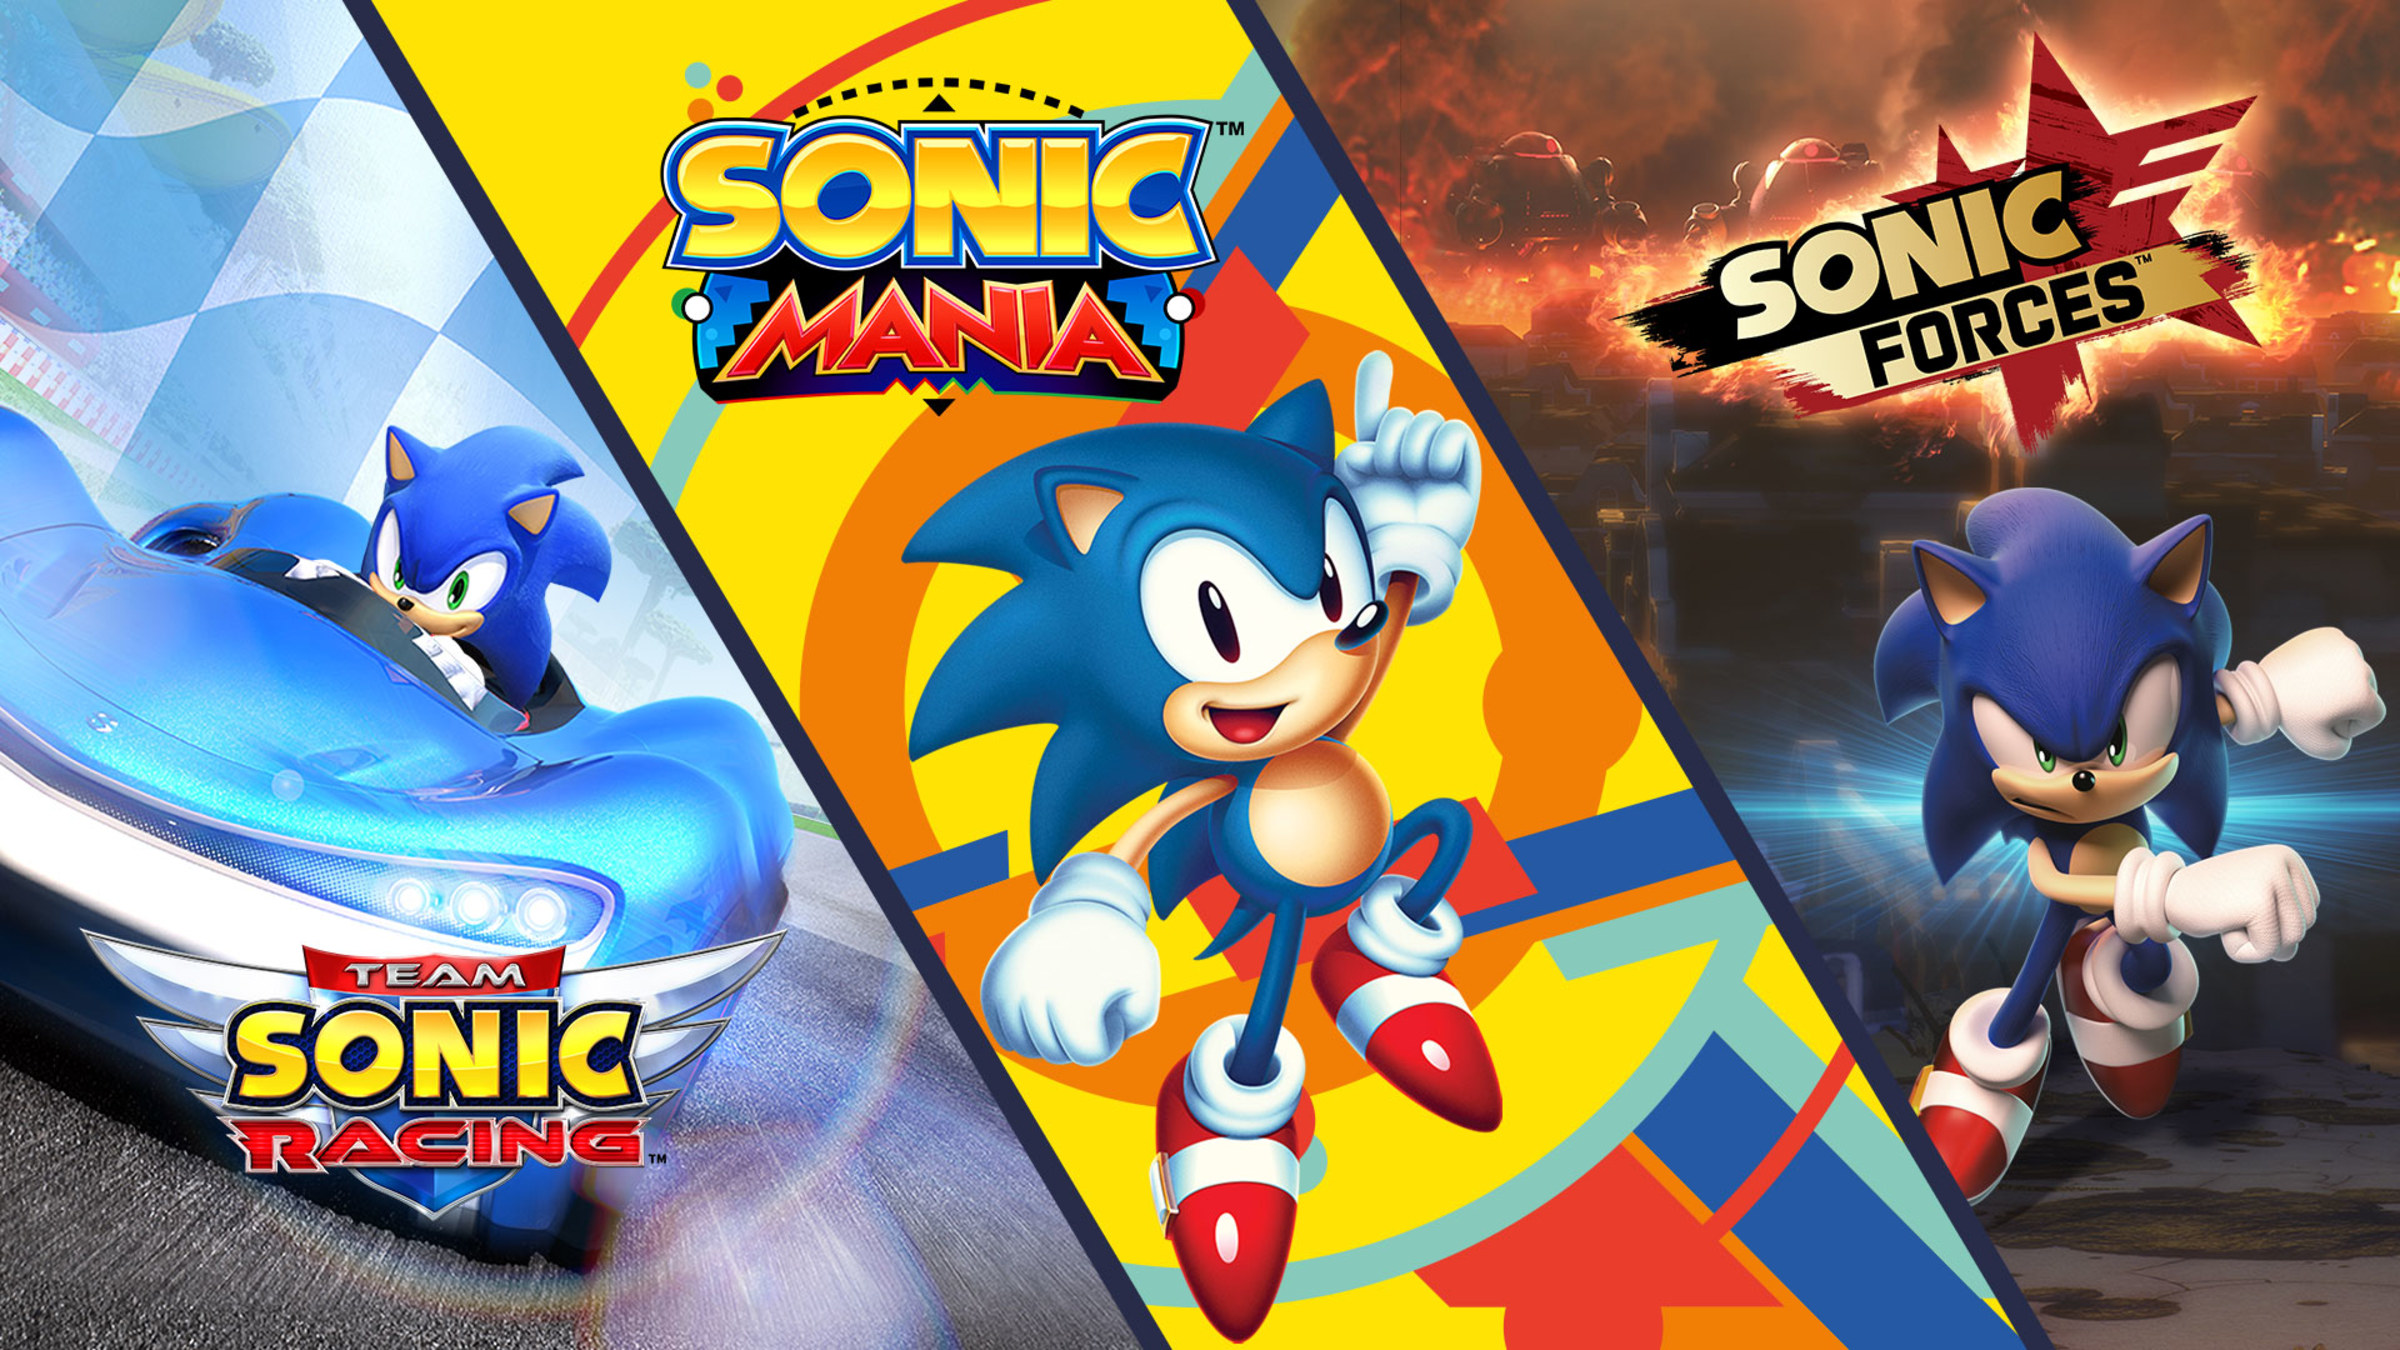 15 Sonic Games That Changed the Series for the Better